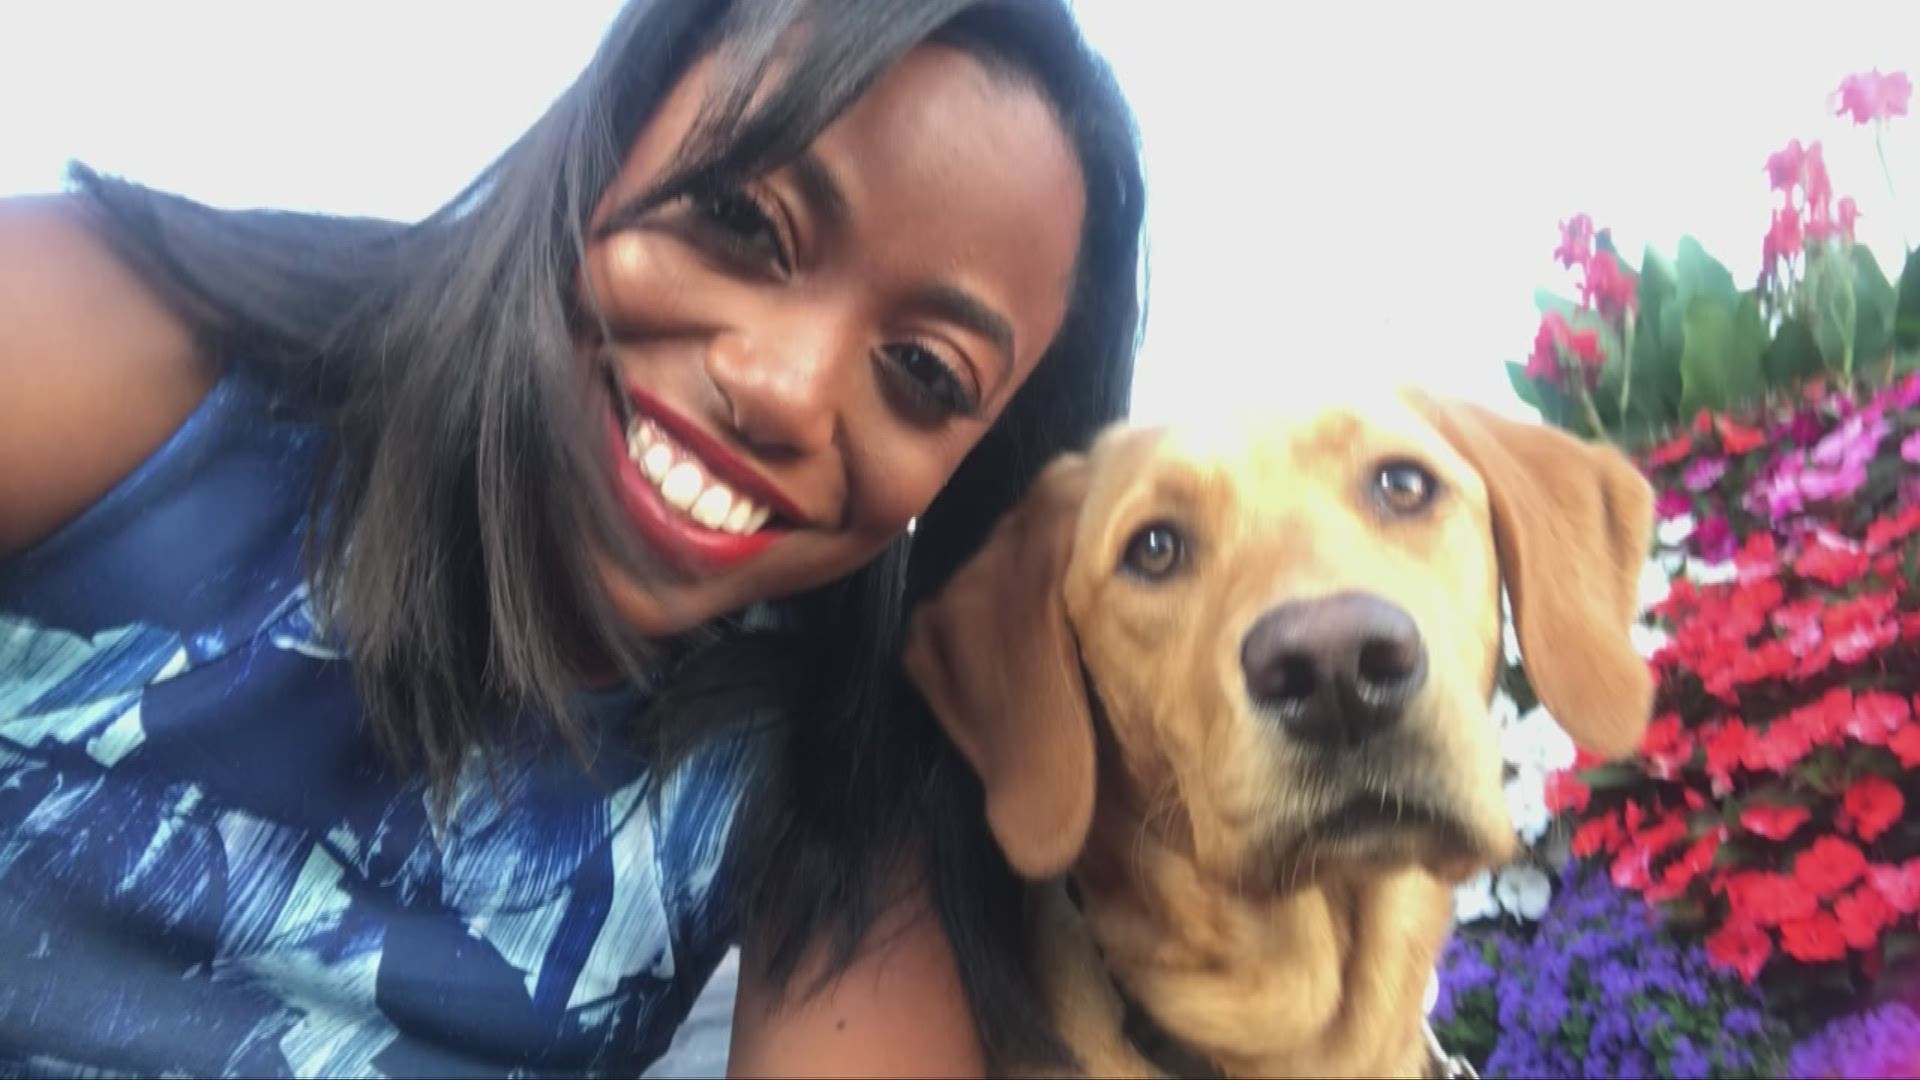 Aug. 26, 2019: Happy National Dog Day! We are celebrating this special pup day by sharing pictures of your dogs live on TV.